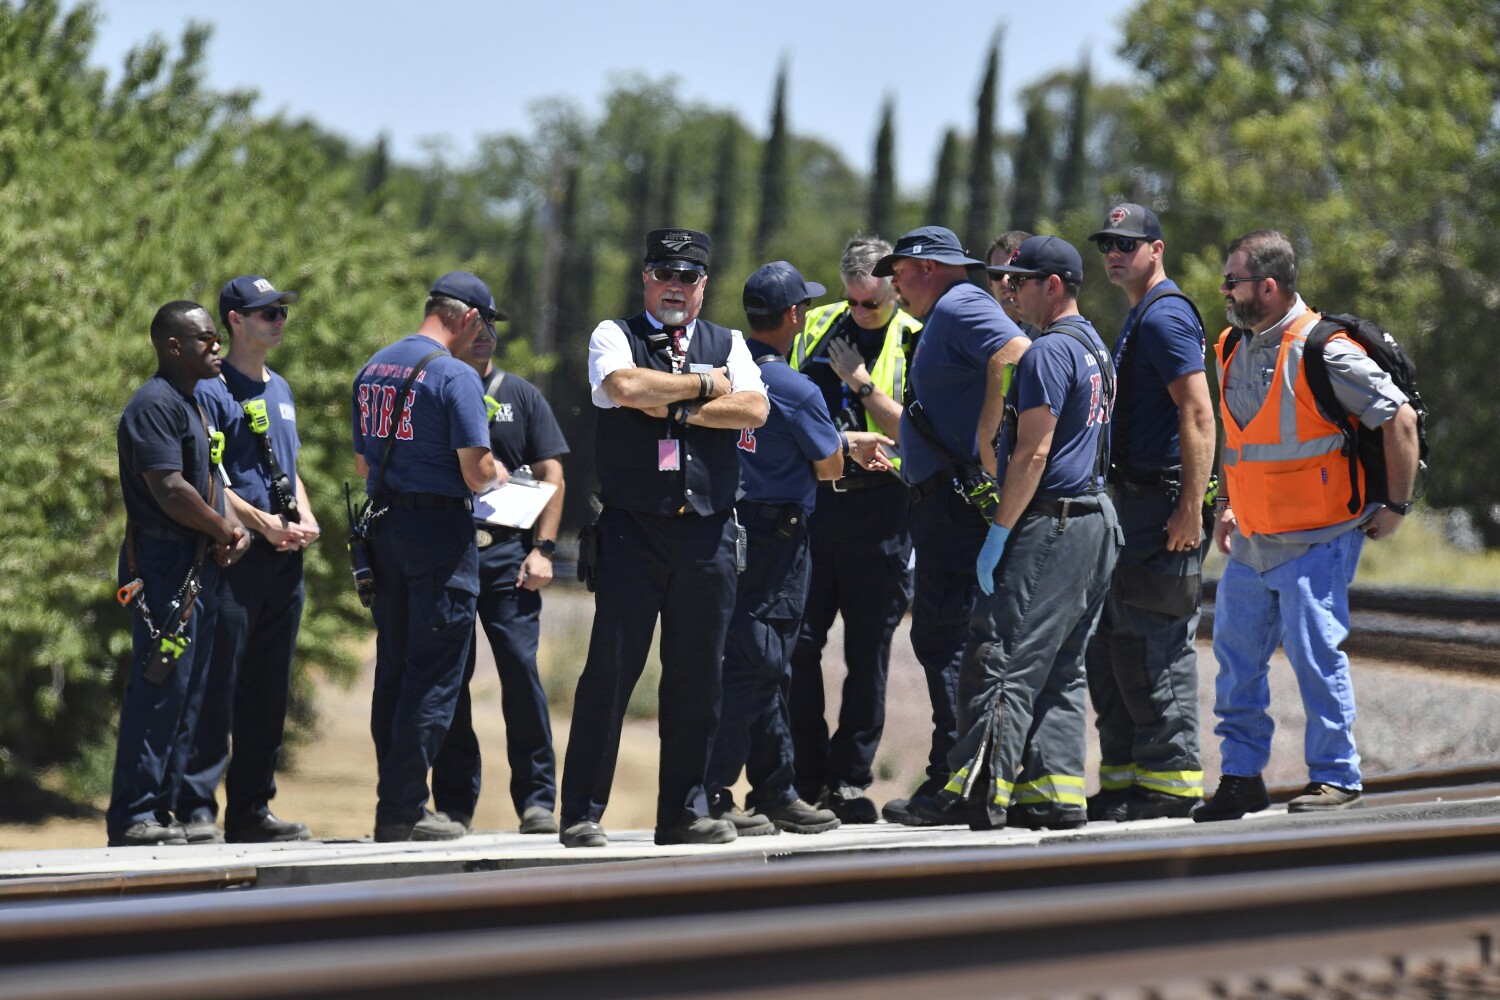 9-year-old boy dies from injuries suffered in East Bay Amtrak collision that killed 3 others